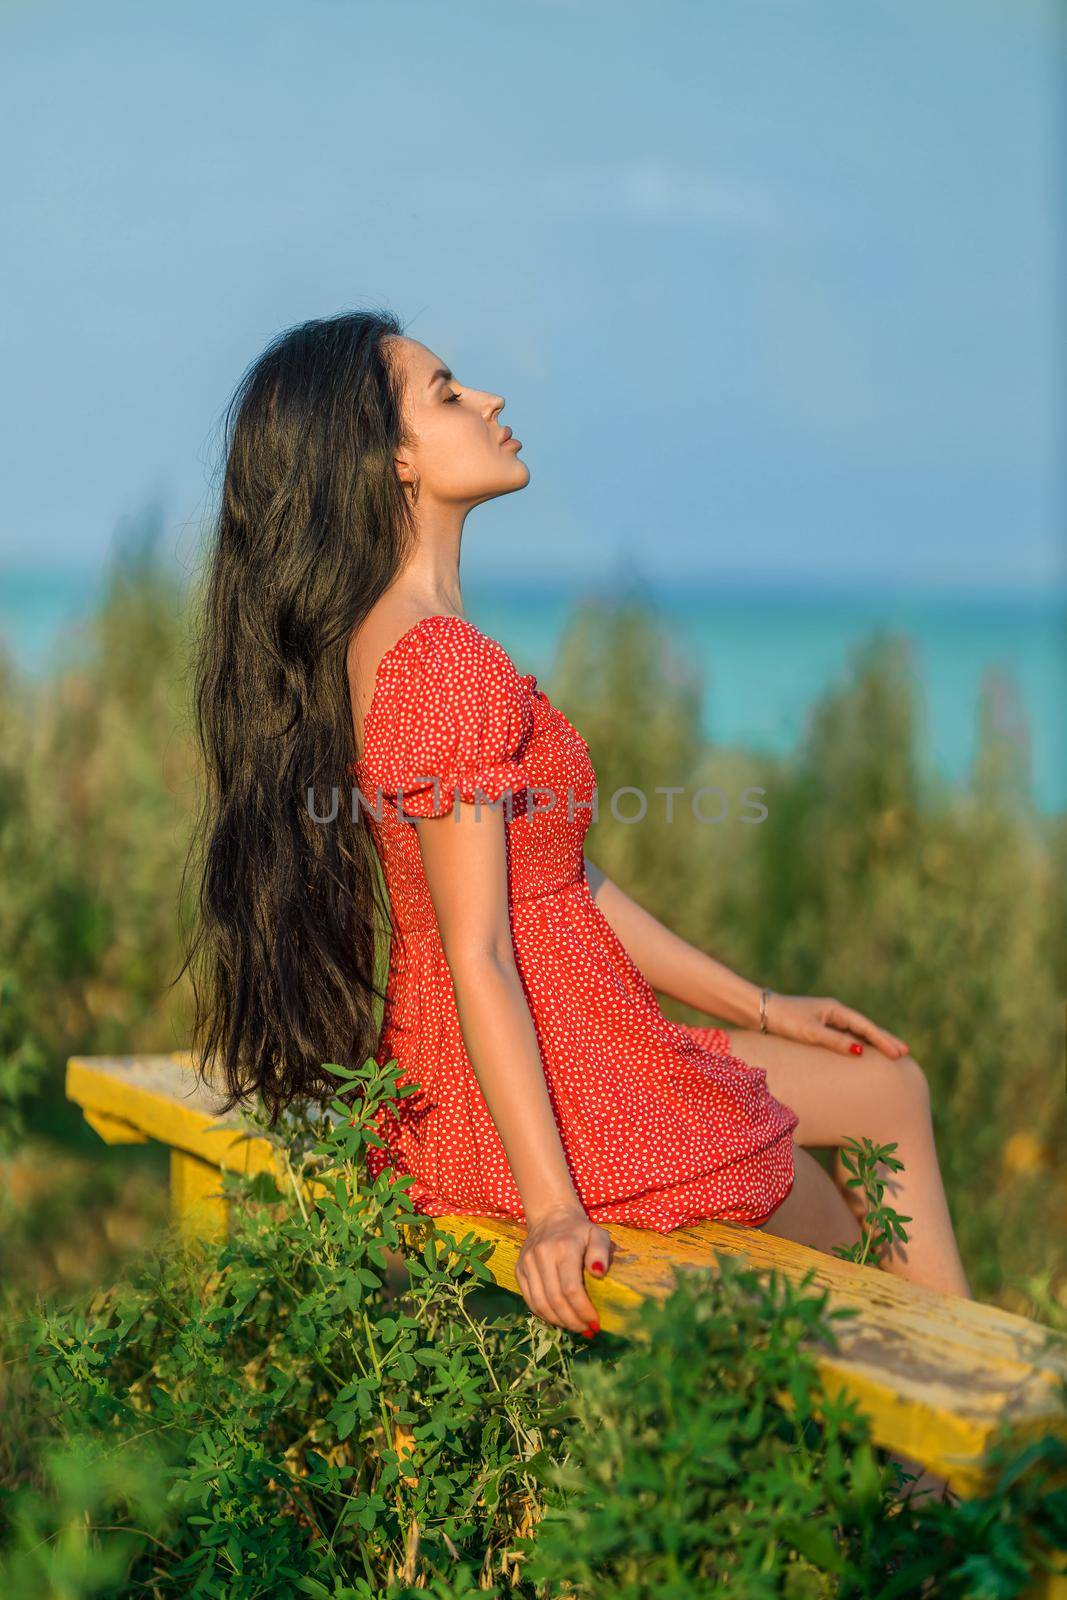 Girl in a red dress with polka dots sits on a bench overlooking the sea by but_photo